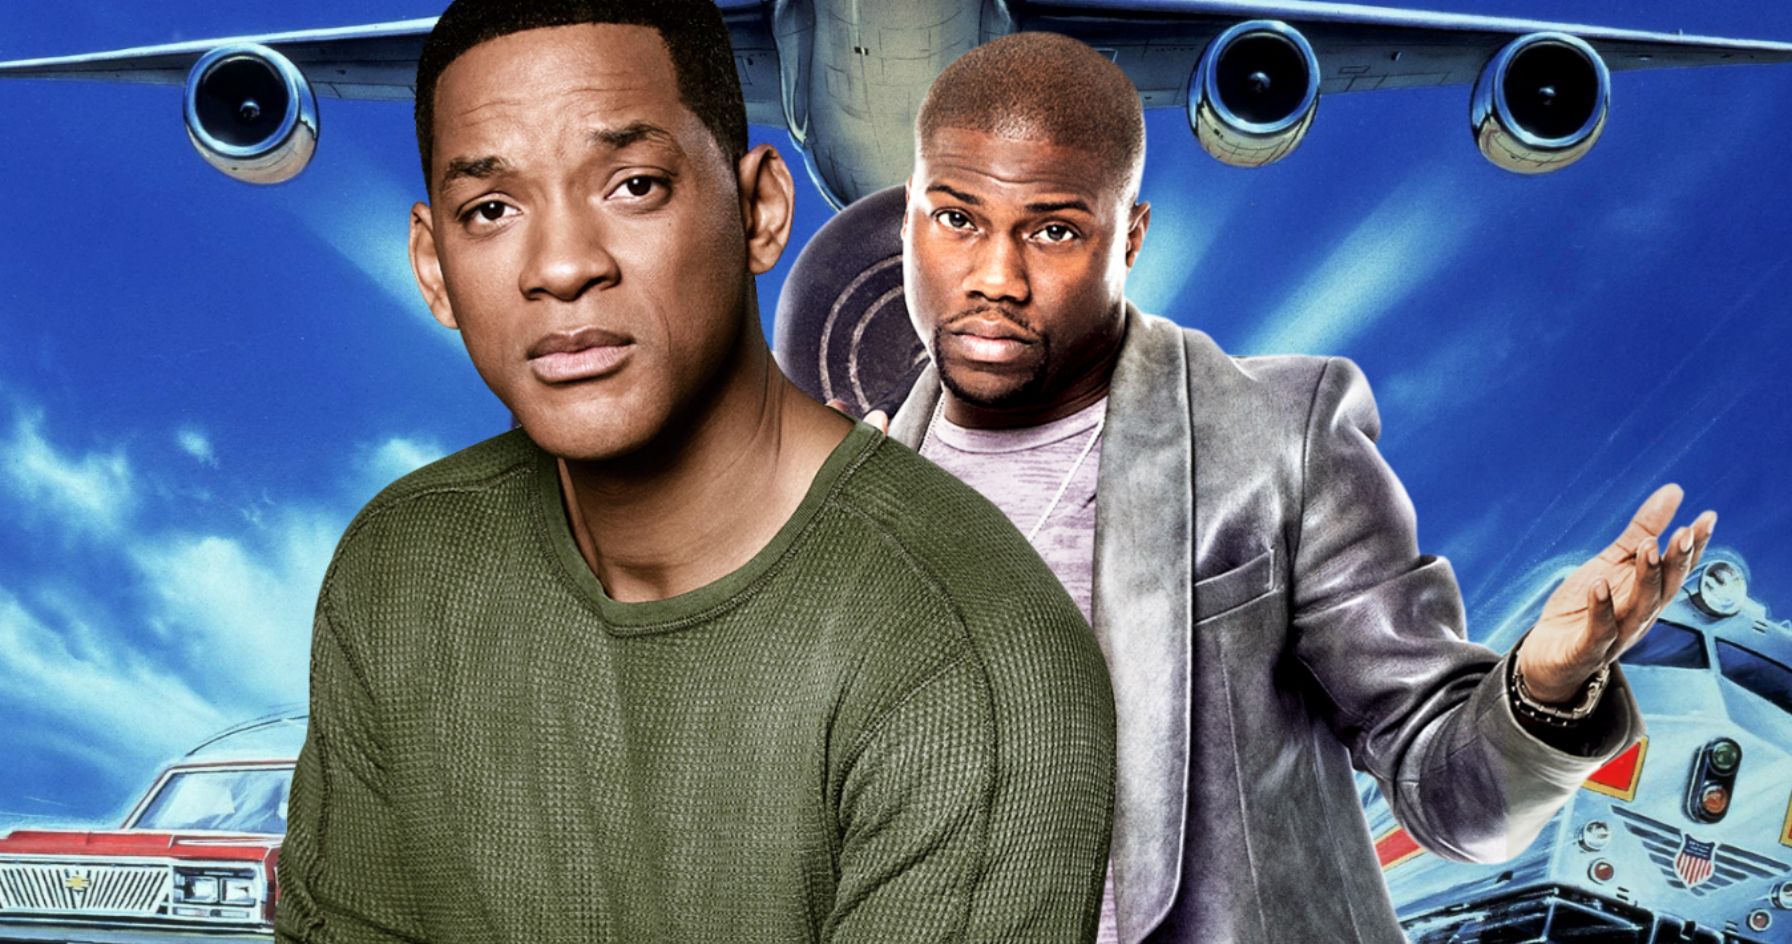 Planes, Trains and Automobiles Remake Teams Will Smith and Kevin Hart